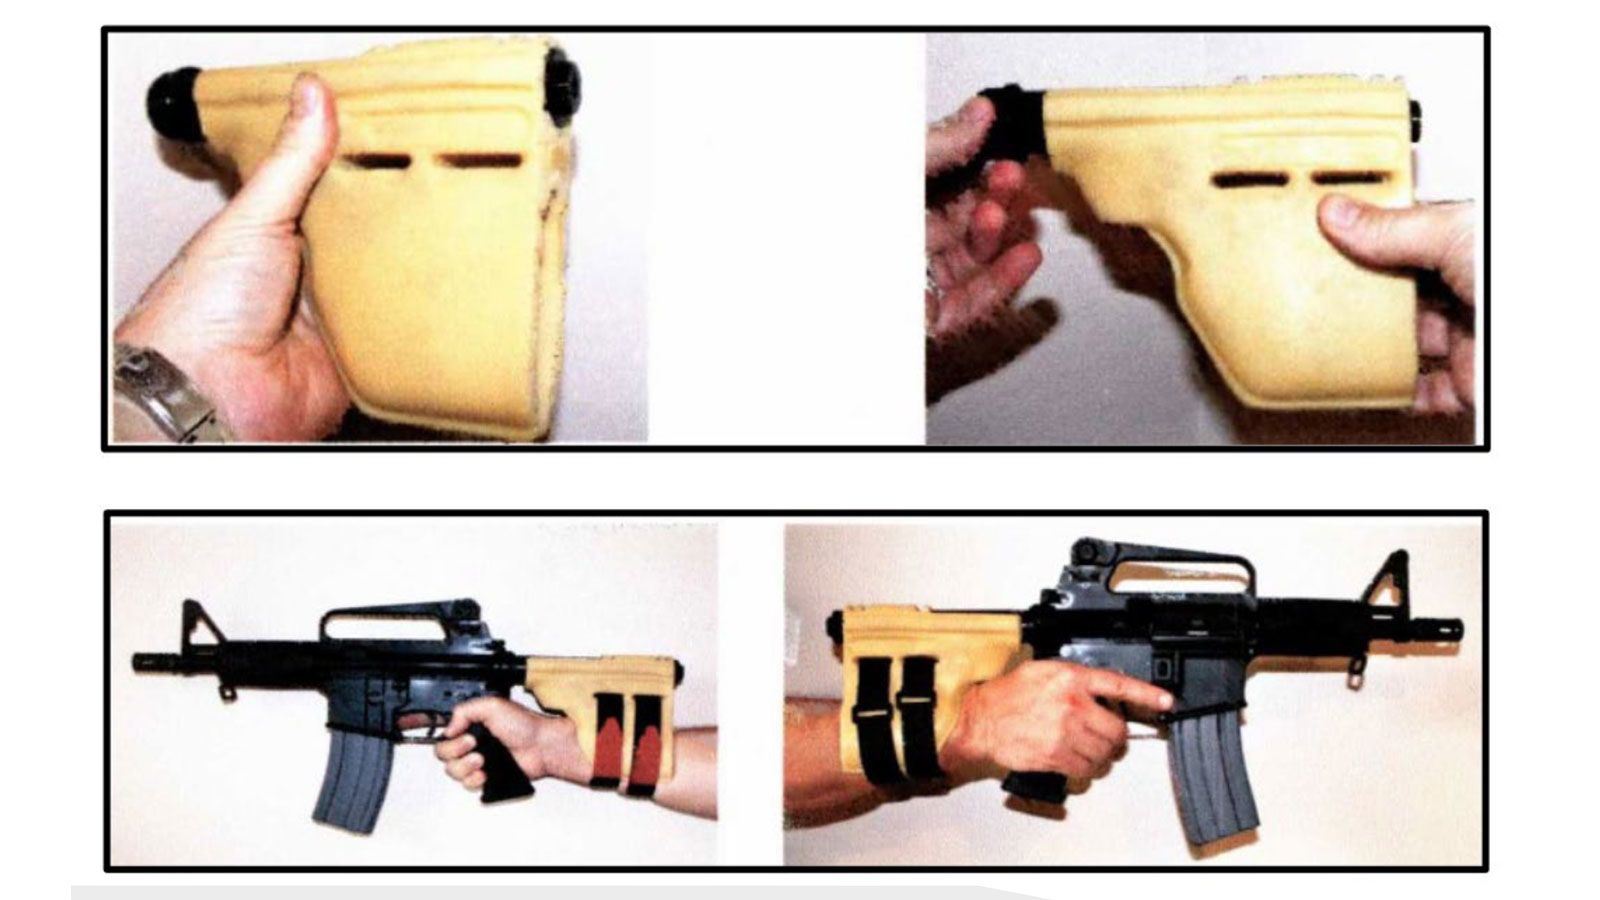 Republican AGs sue ATF over new rule regulating pistol-stabilizing braces